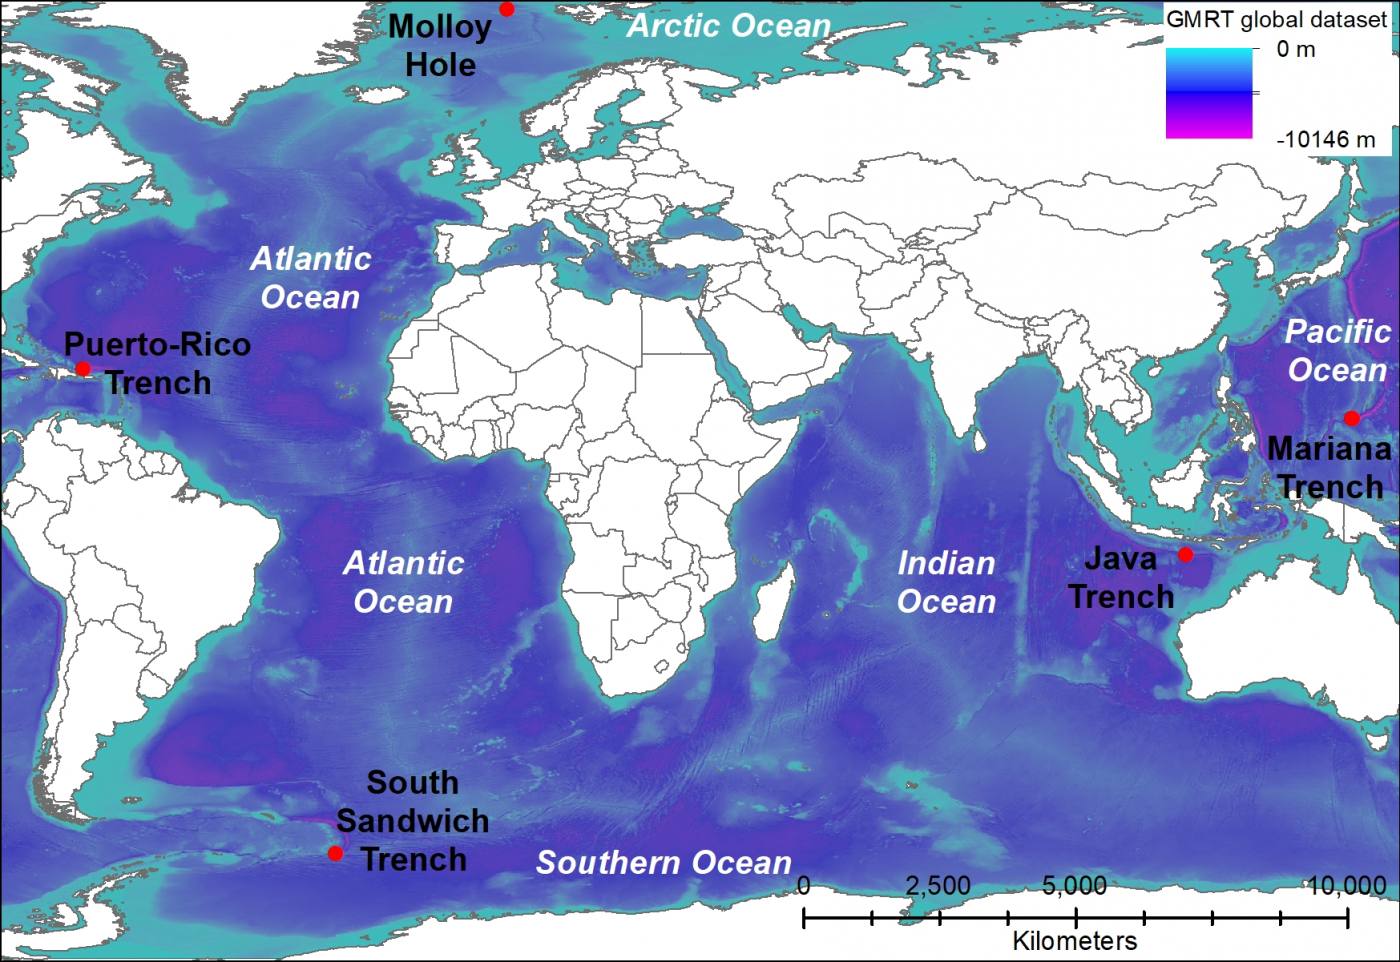 Deepest points of the Indian Ocean and Southern Ocean revealed